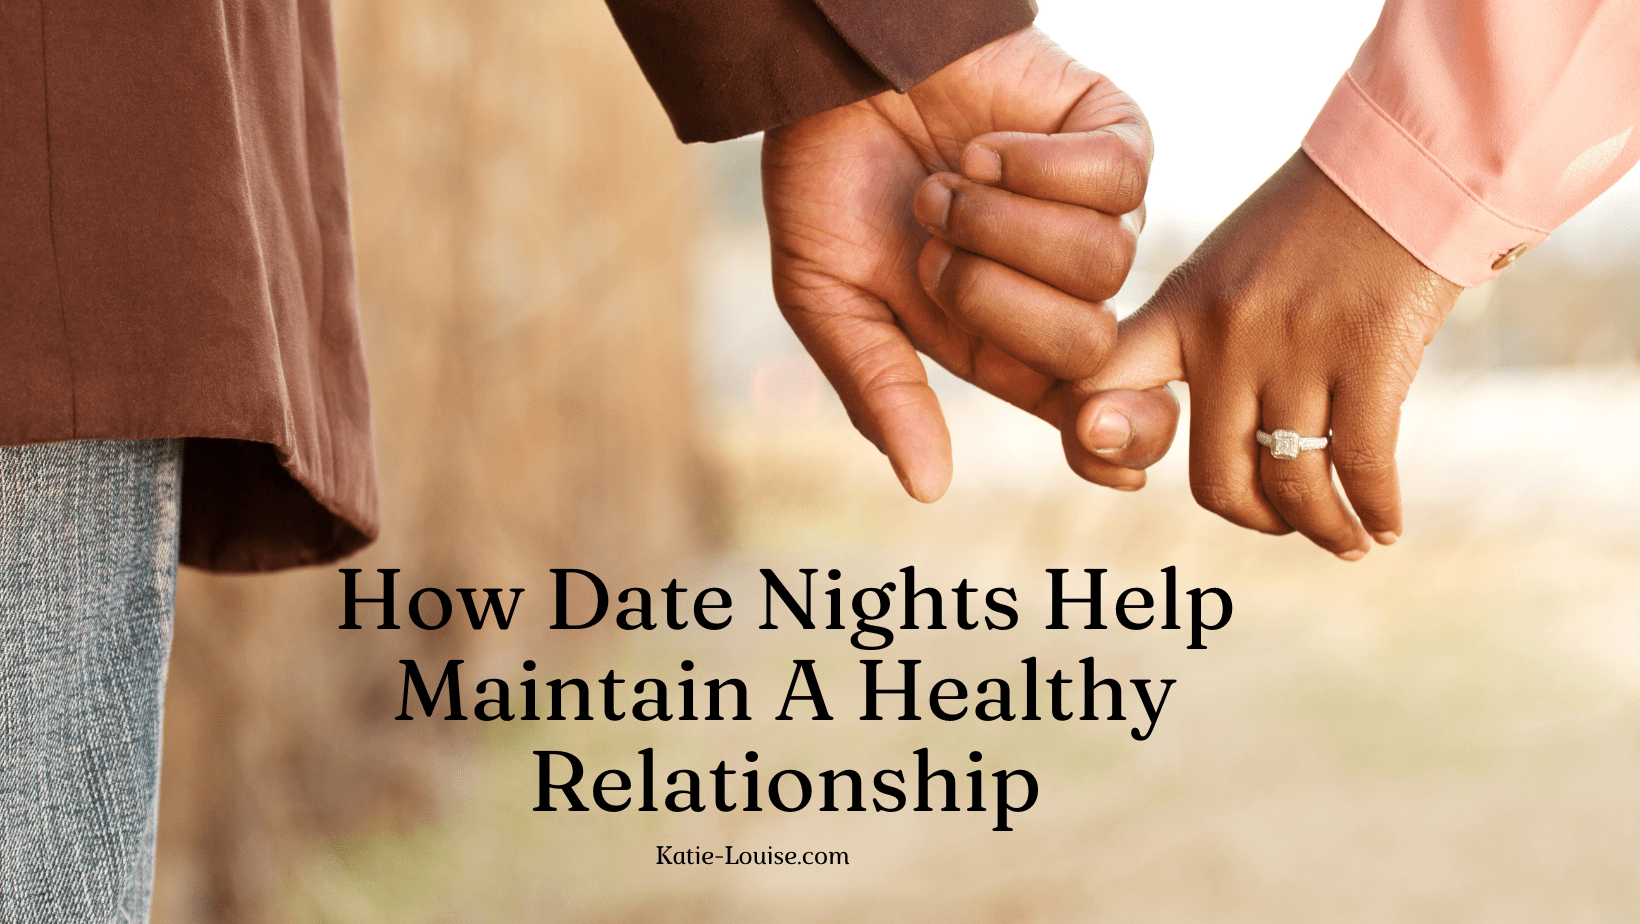 Balancing Work and Love: How Date Nights Help Maintain a Healthy Relationship